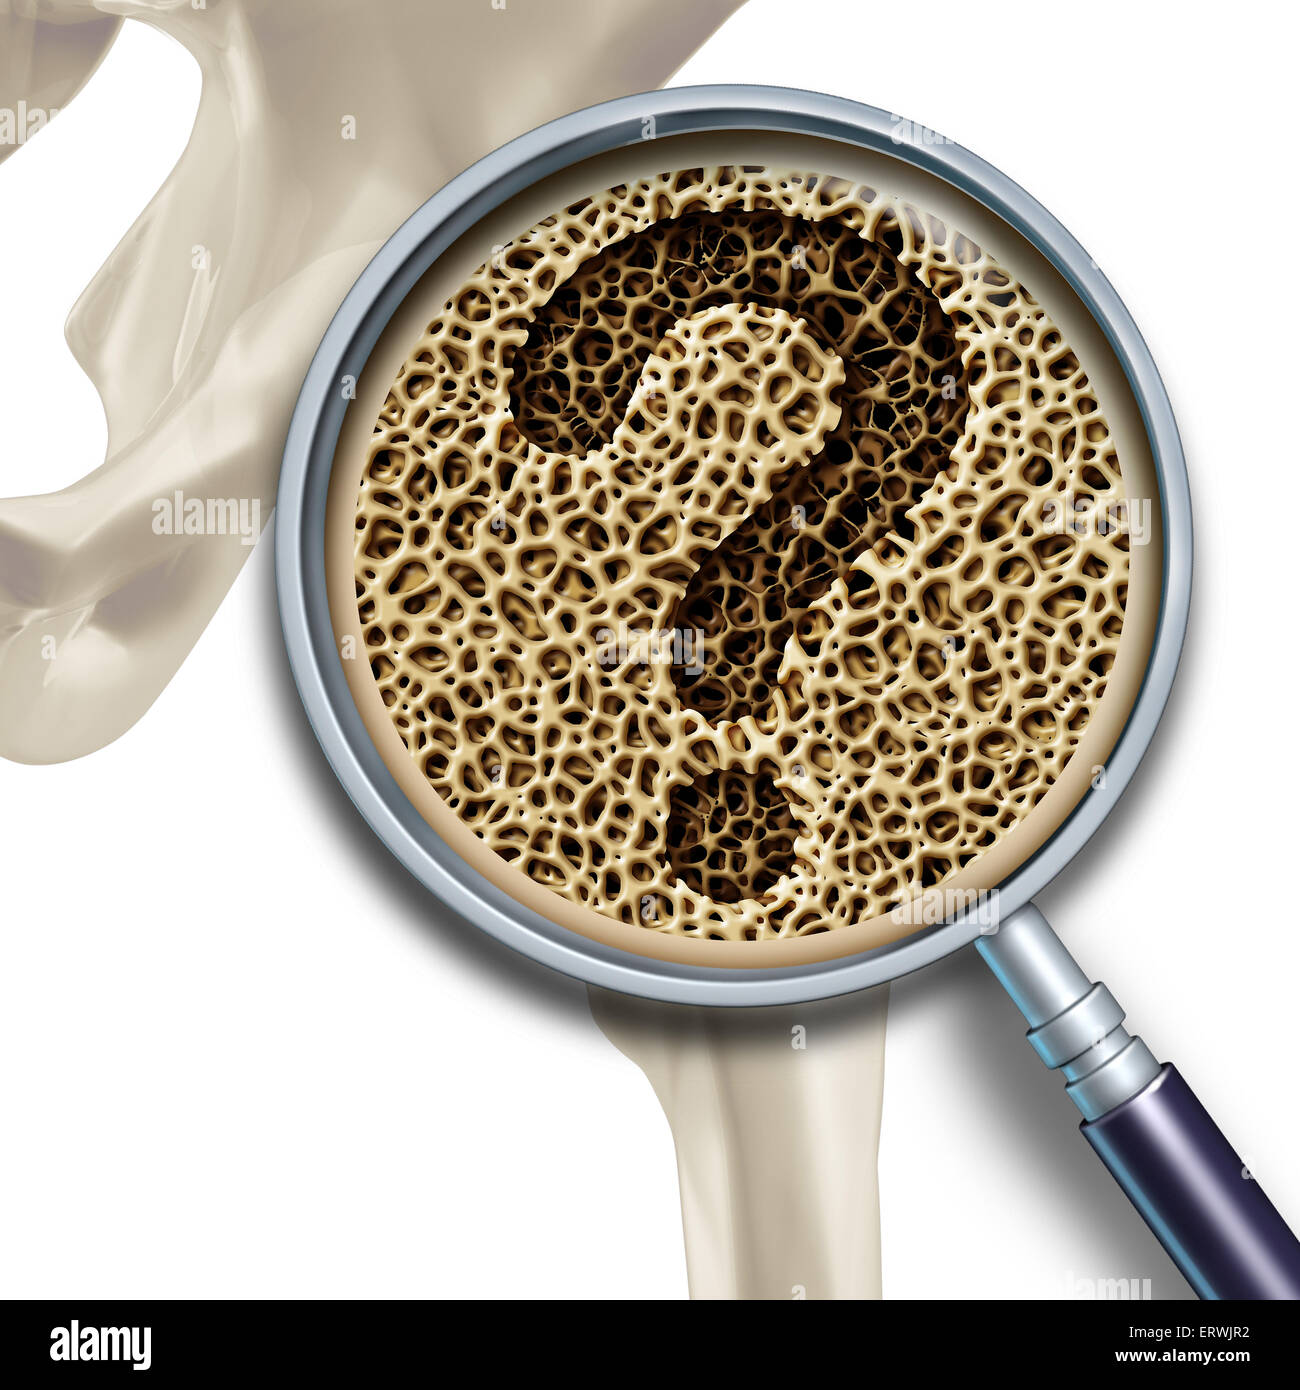 Bone medical health questions and osteoporosis illustration concept as a close up diagram of the inside of human skeletal hip bones with a magnification glass showing a normal healthy condition degrading to abnormal unhealthy anatomy as a question mark. Stock Photo